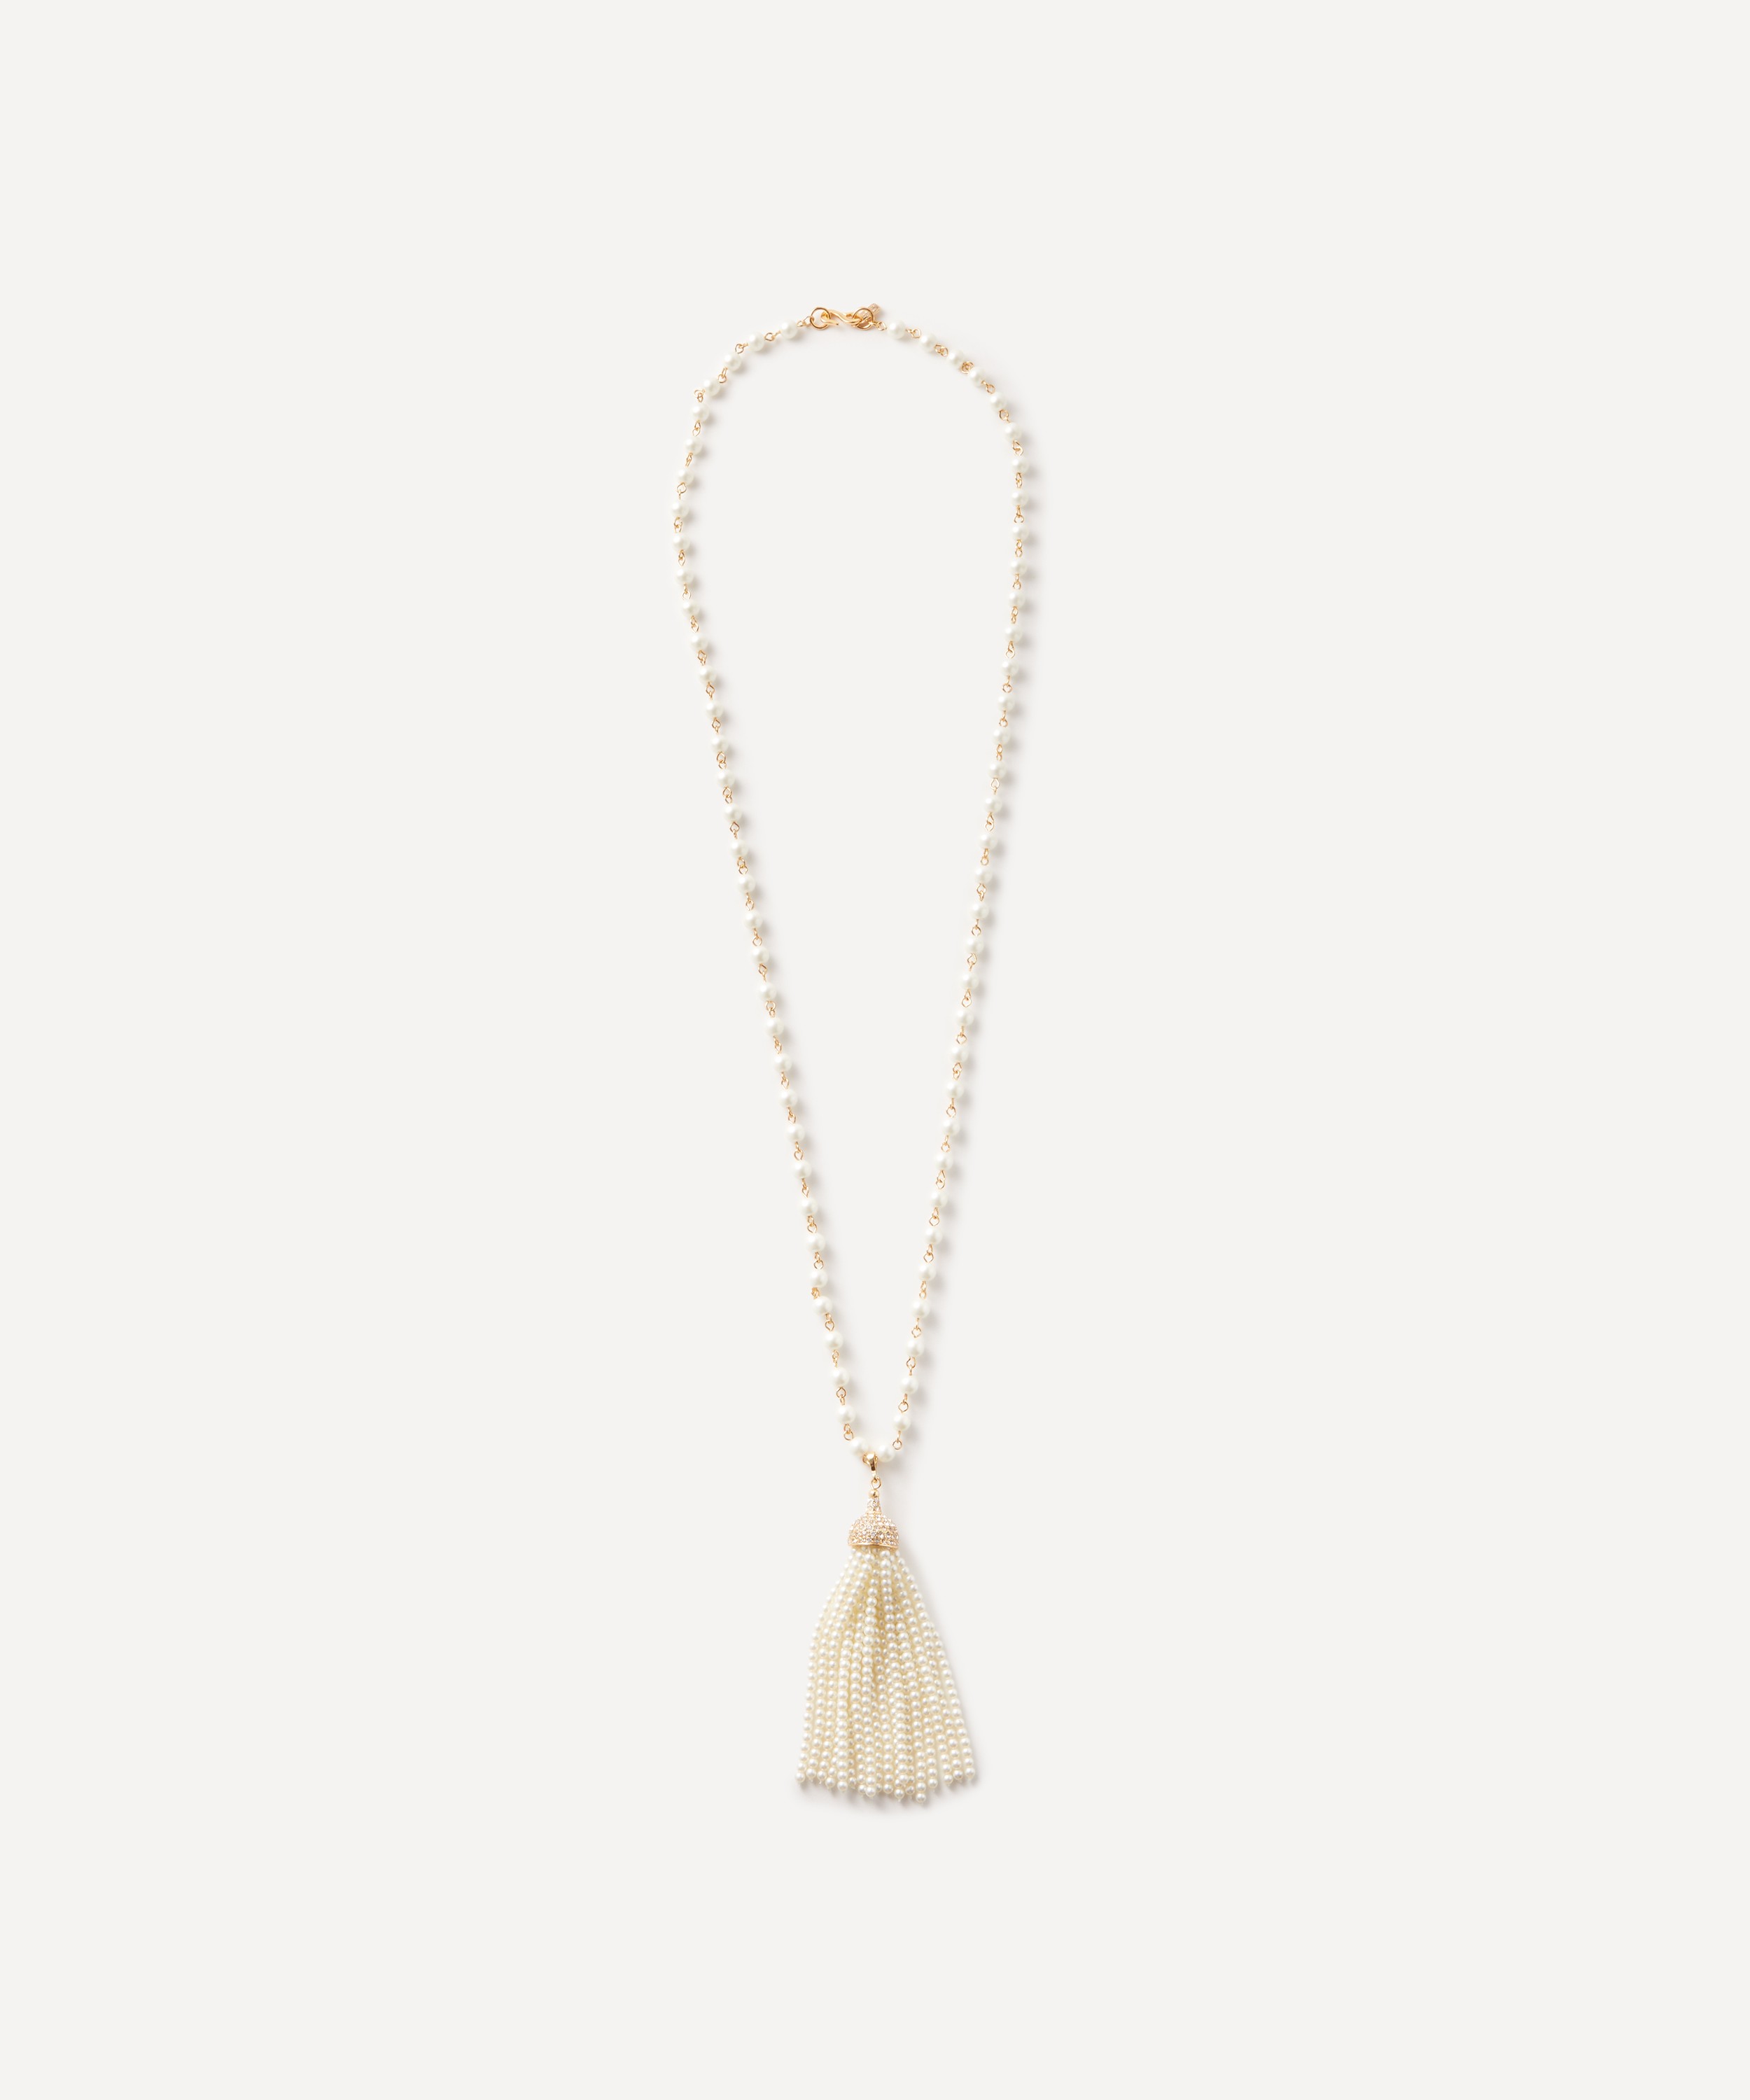 Kenneth Jay Lane - Gold-Plated Pearl and Crystal Tassel Necklace